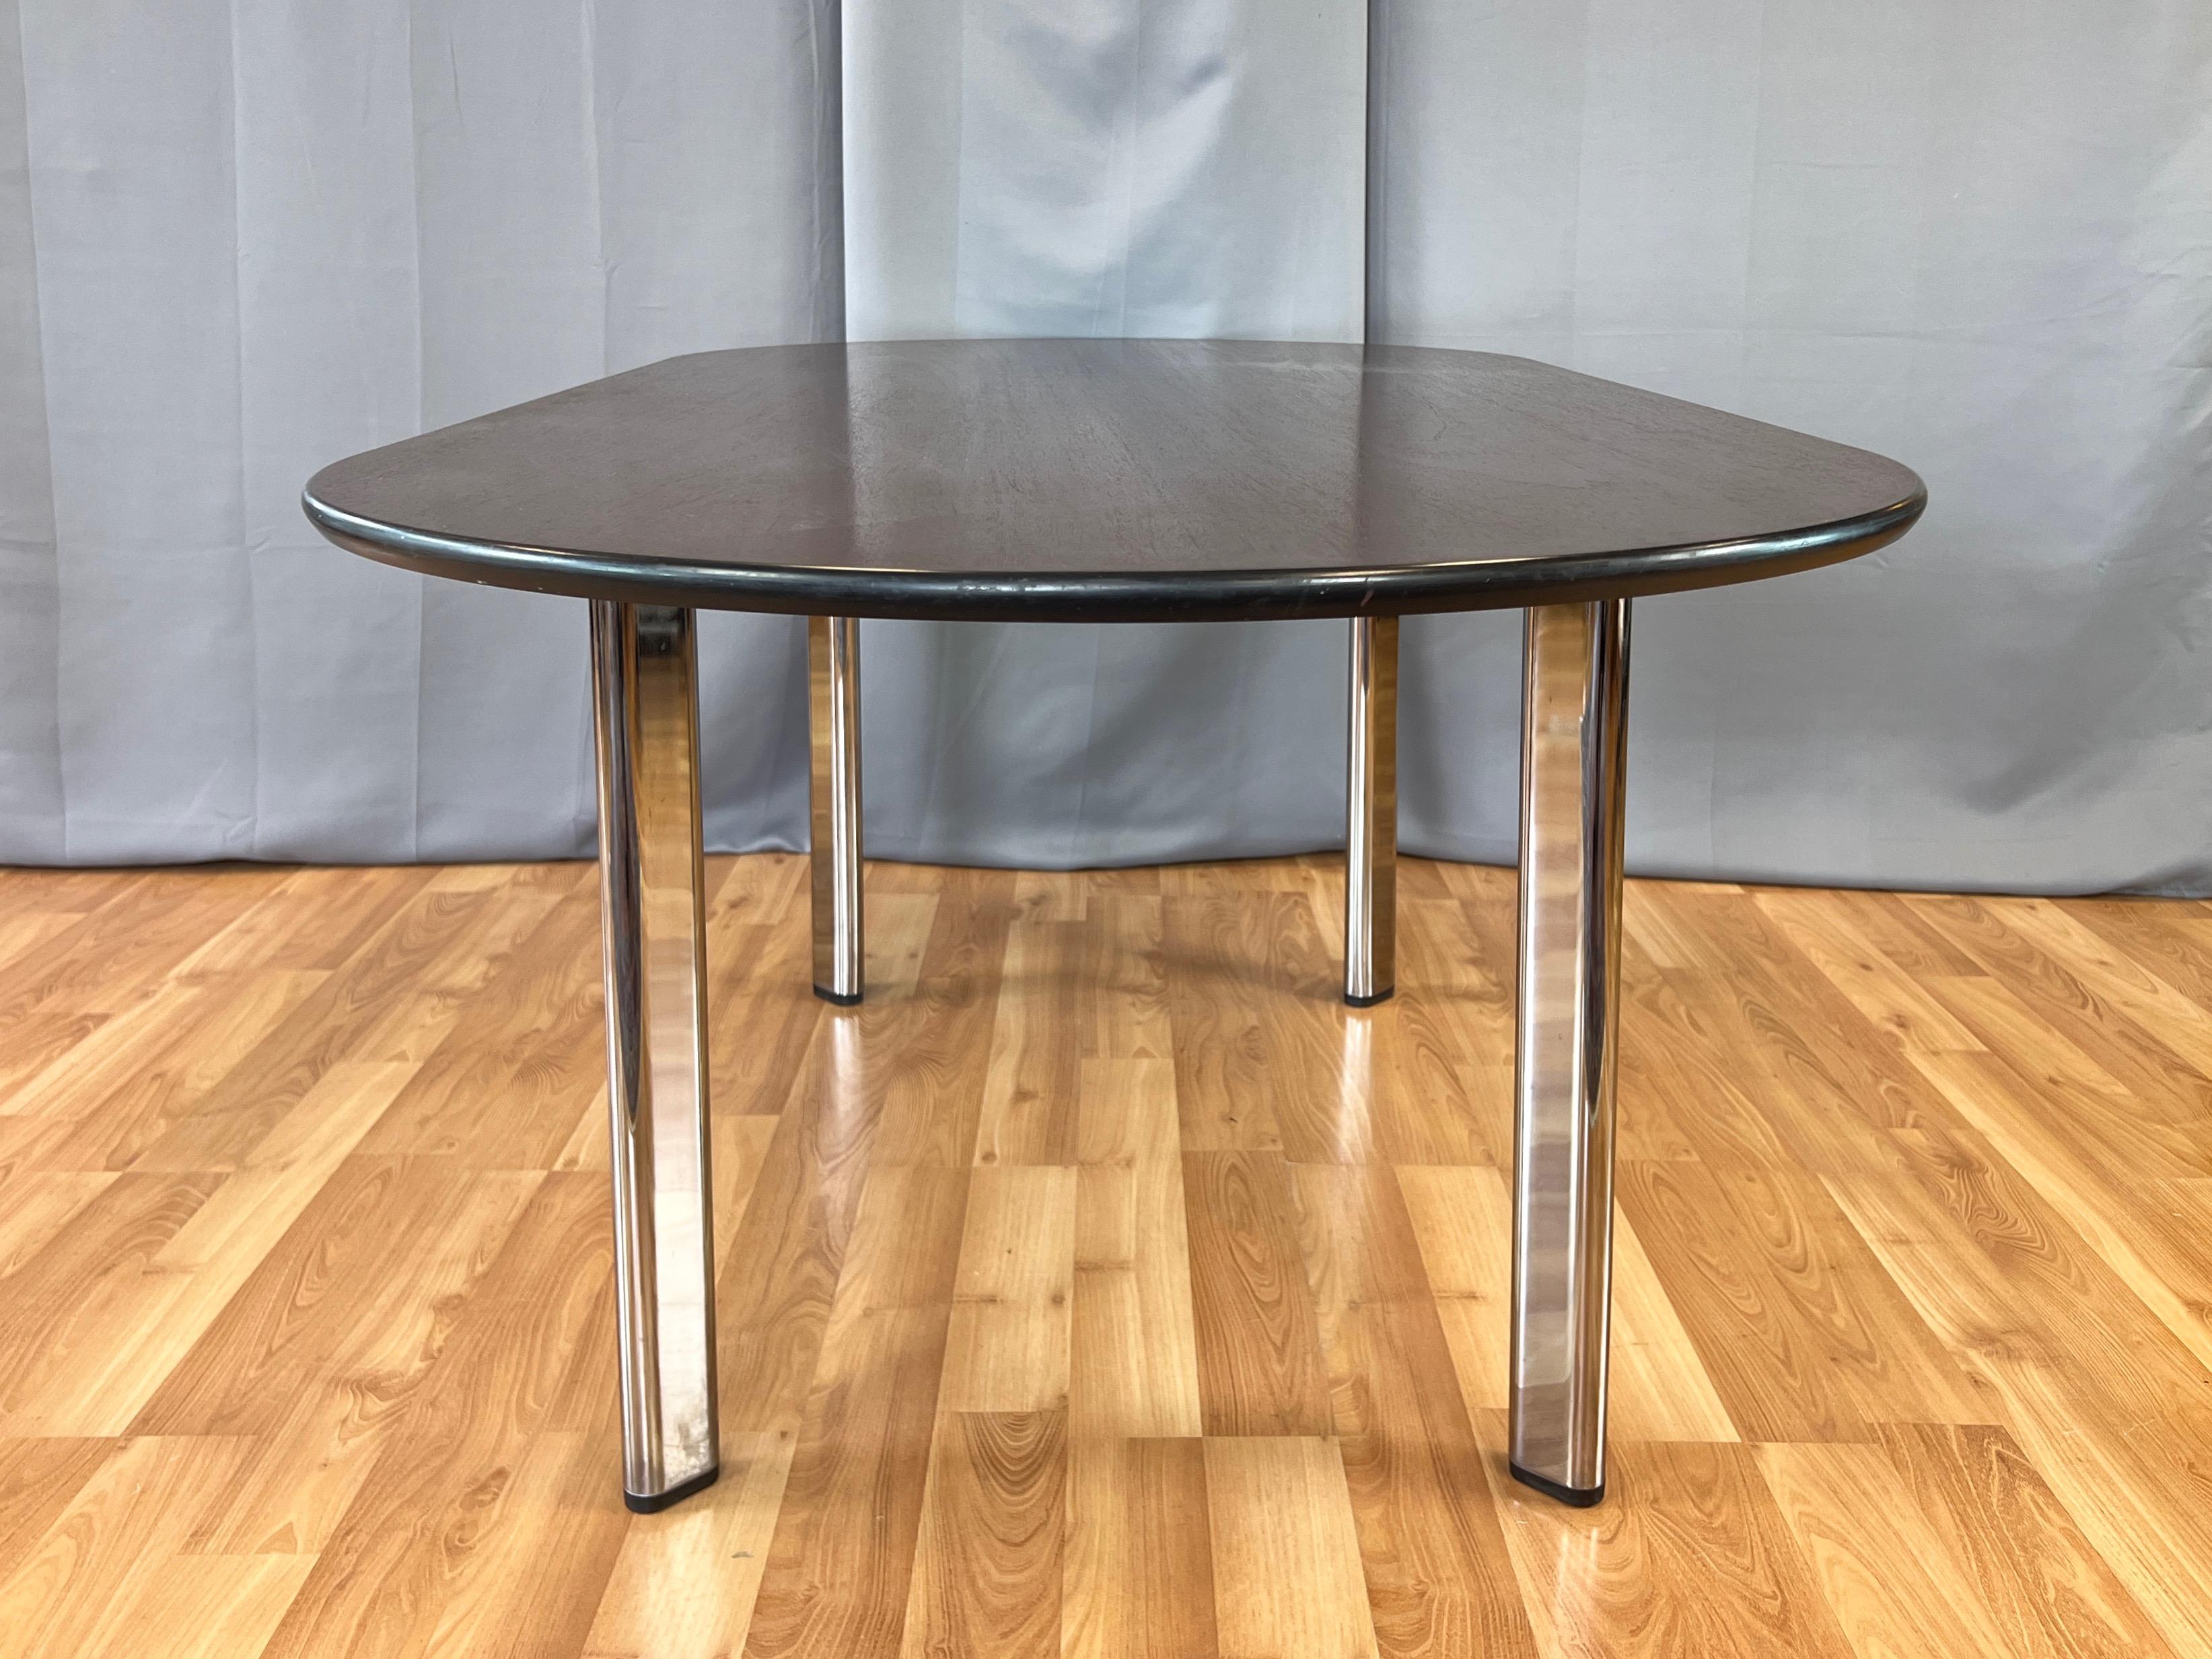 Joseph D’Urso for Knoll High Table in American Cherry and Chrome, 1995 For Sale 5